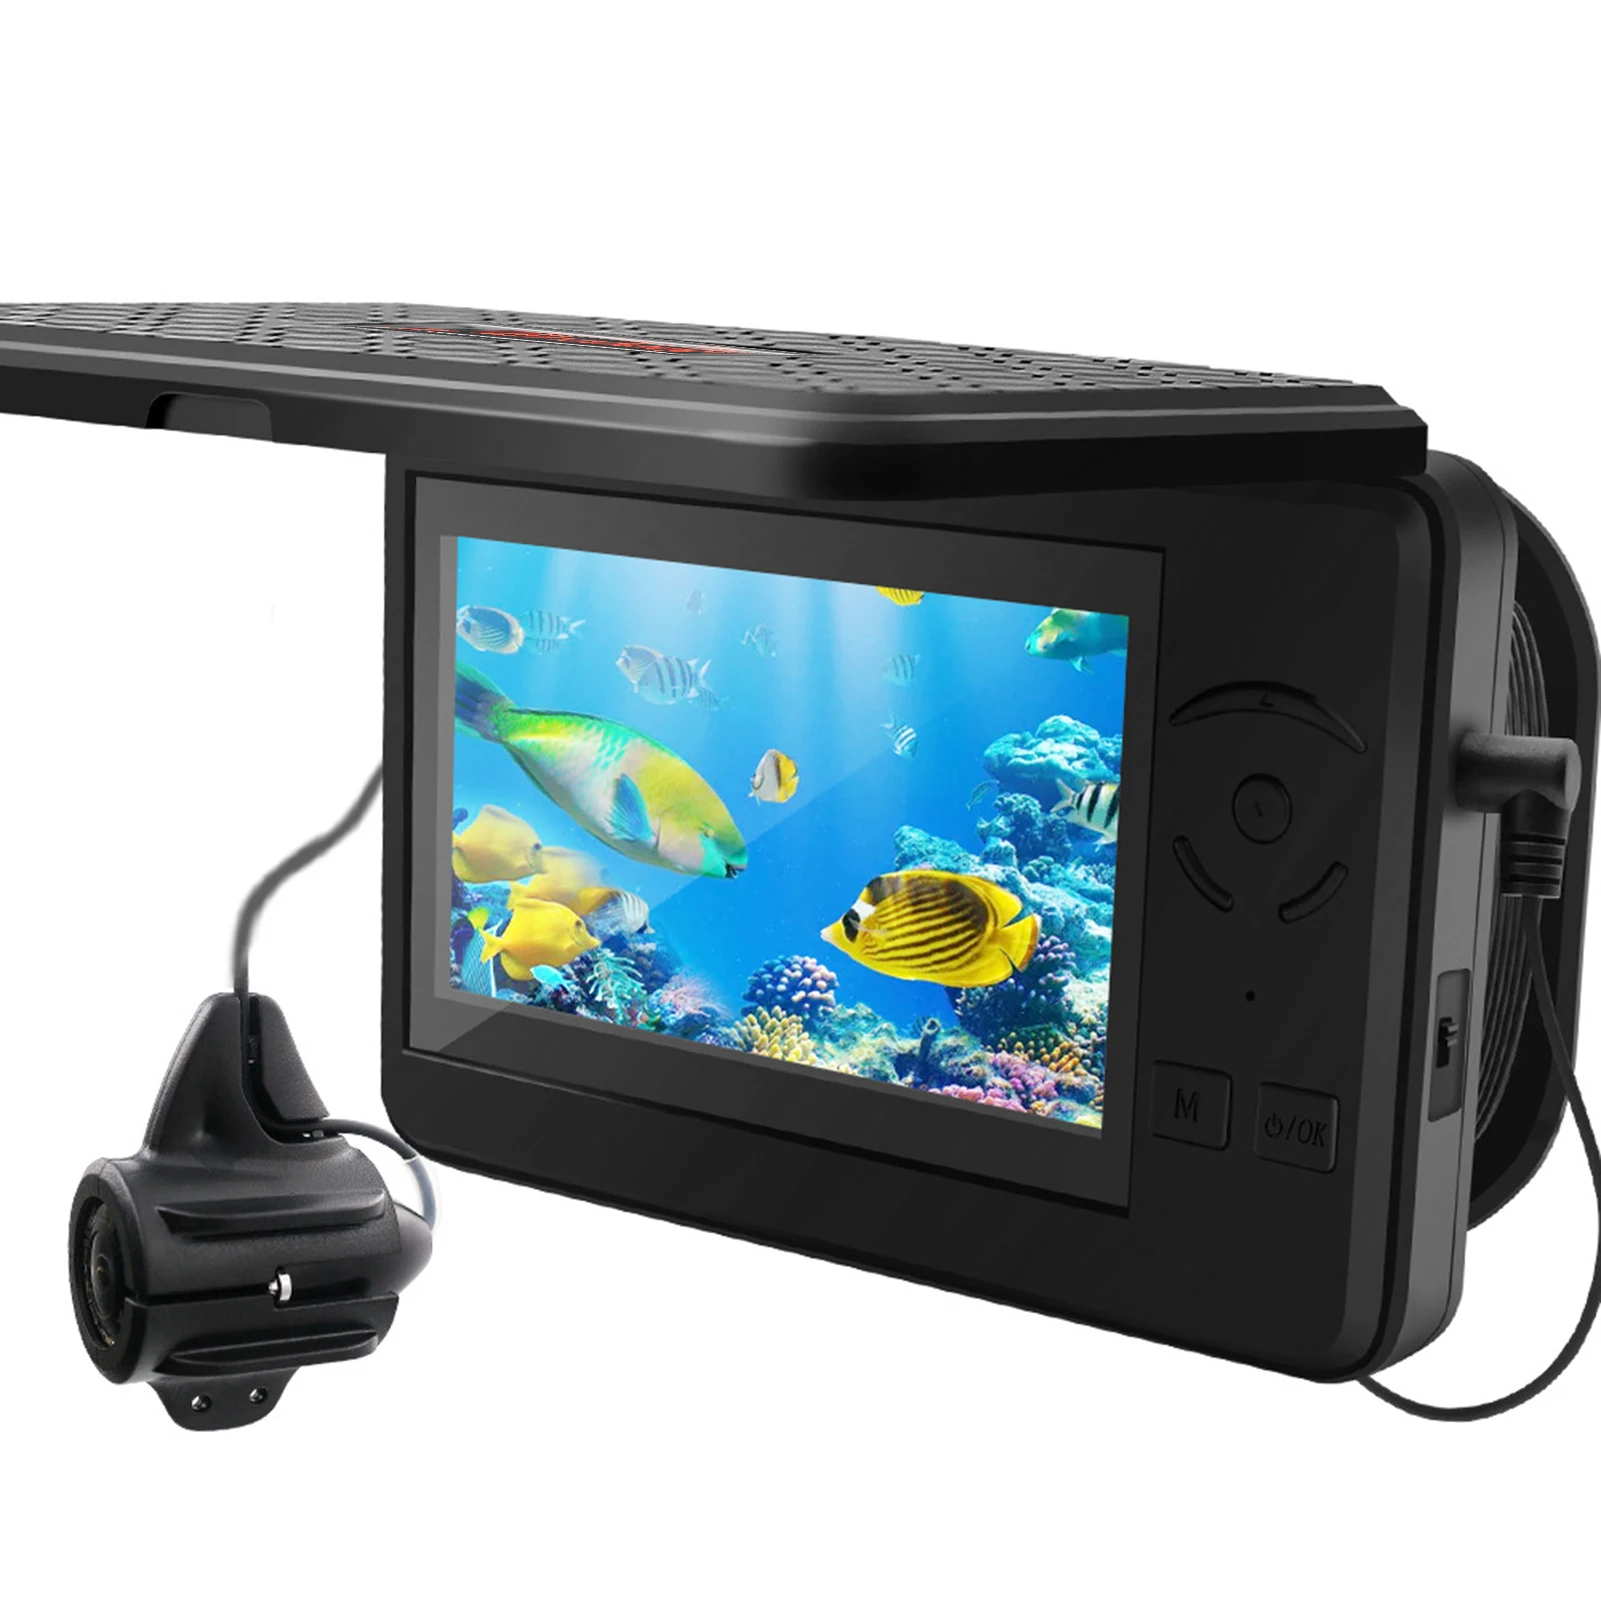 

Portable Underwater Fishing Camera Waterproof Video Fish Finder DVR Camera with 4.3 Inch LCD Display for Ice Lake Boat Fishing